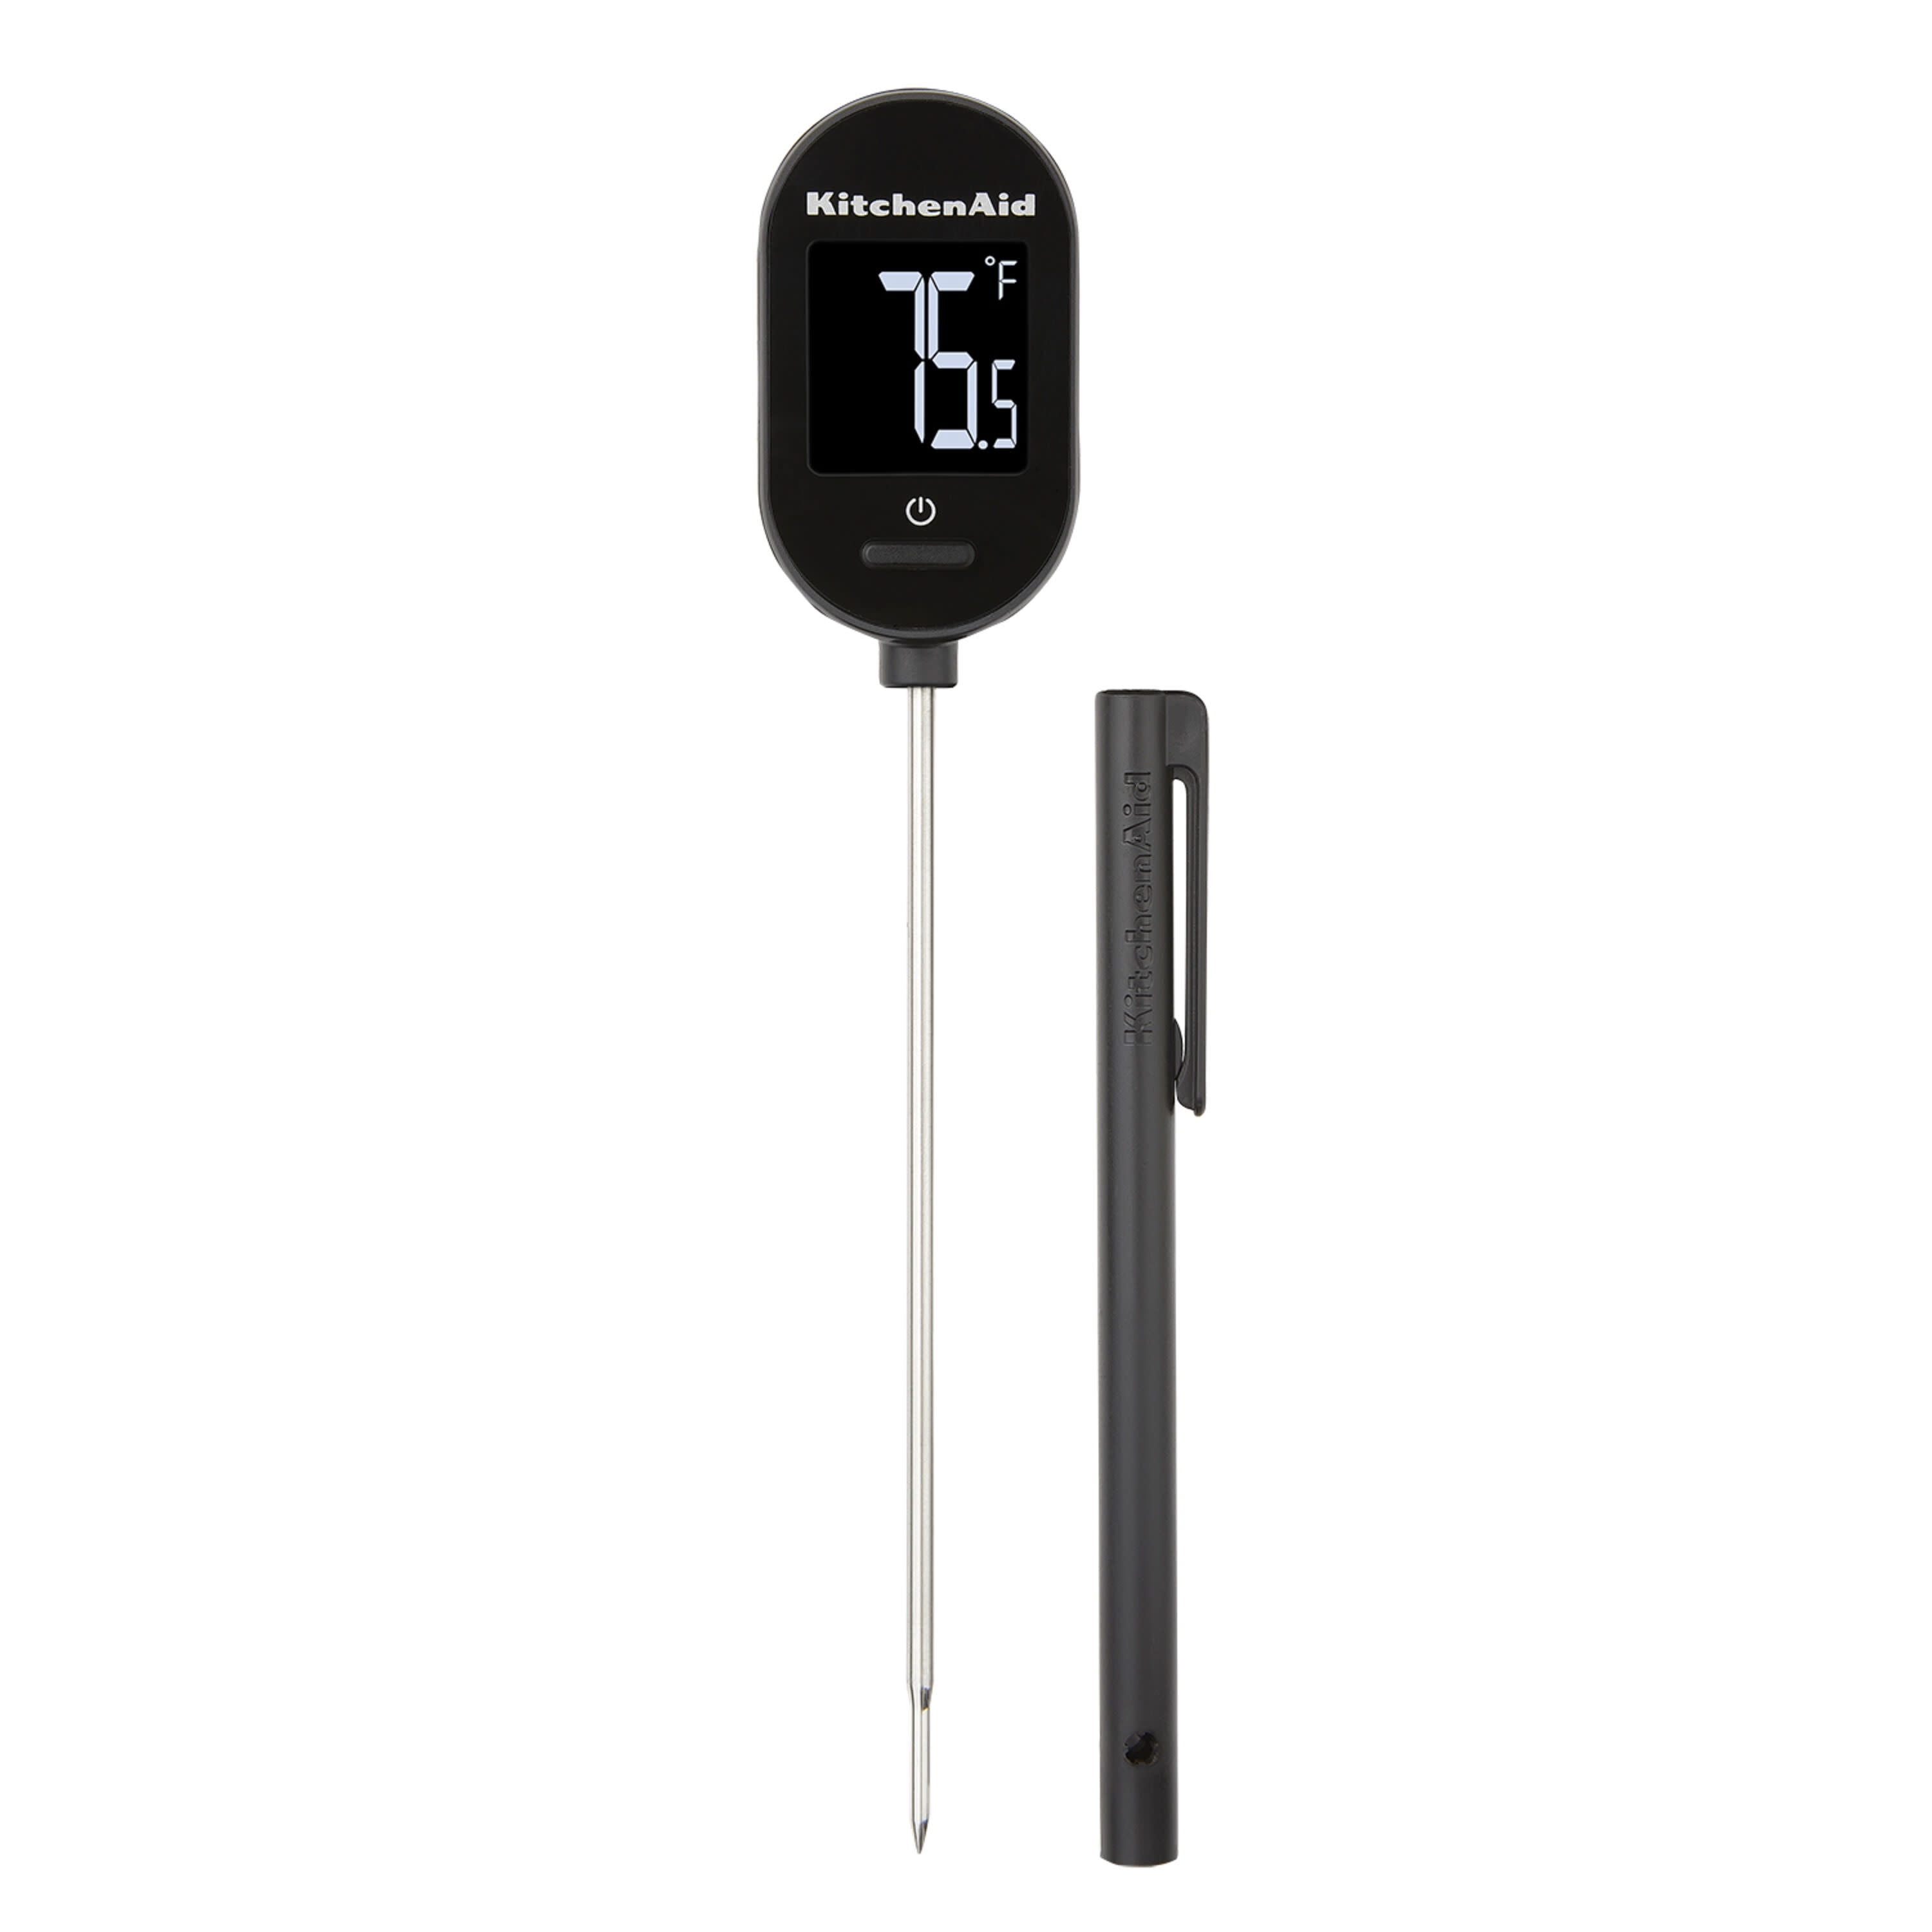 KitchenAid KQ901 Instant Read Food Thermometer for Kitchen or Grill,  TEMPERATURE RANGE: 20F to 220F, 1 inch dial, Black